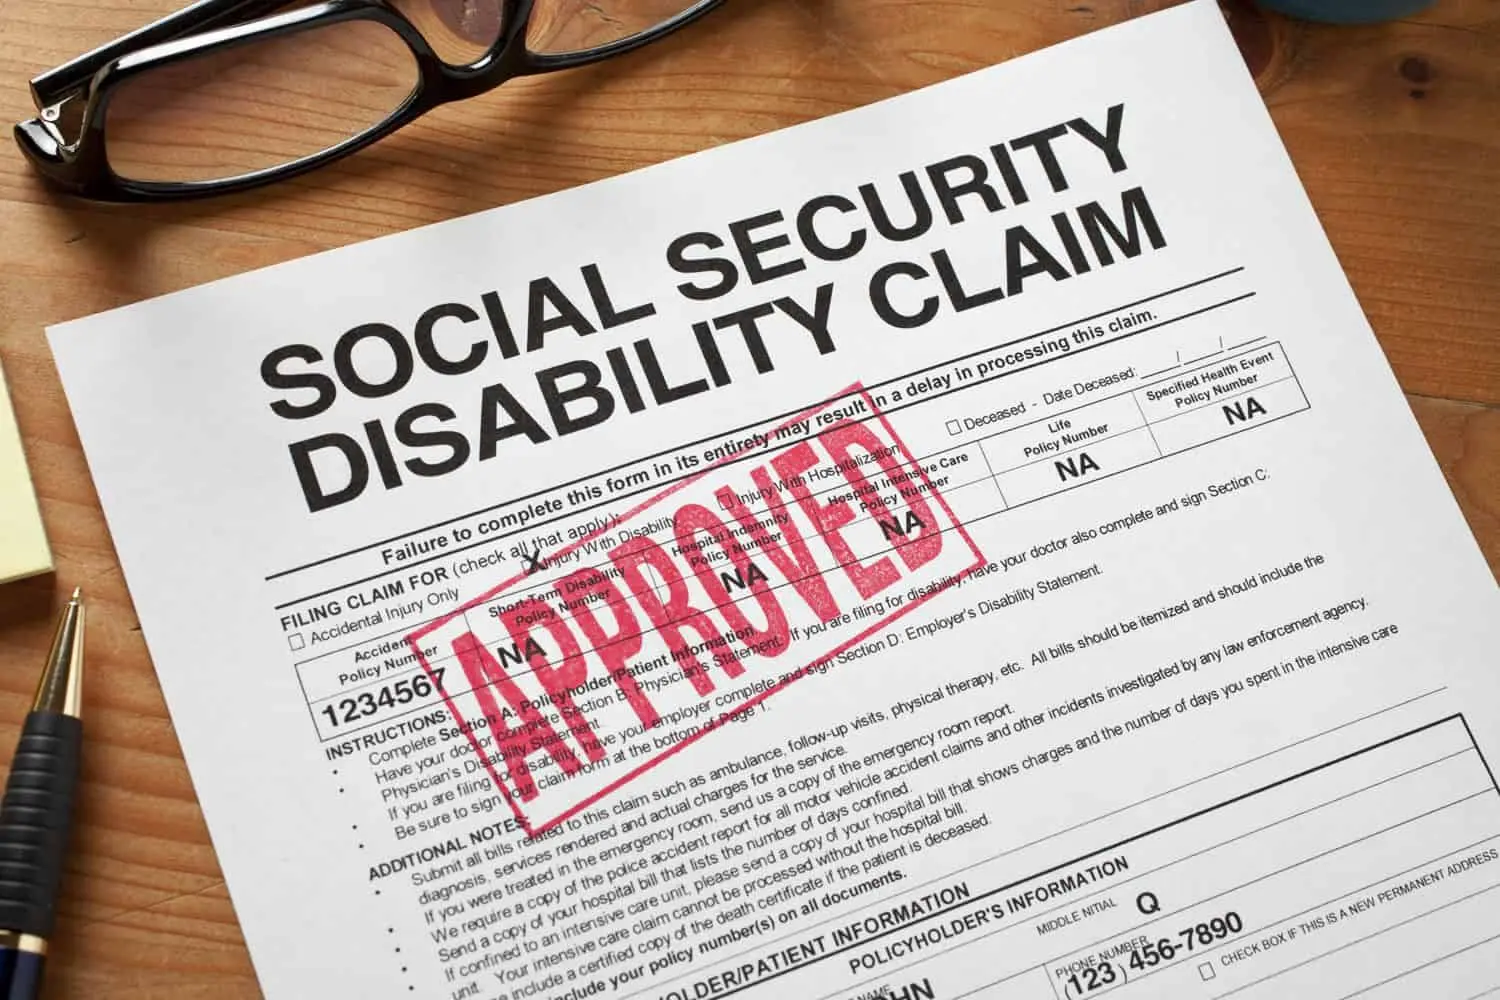 How Do I Check The Status Of My Social Security Disability Claim